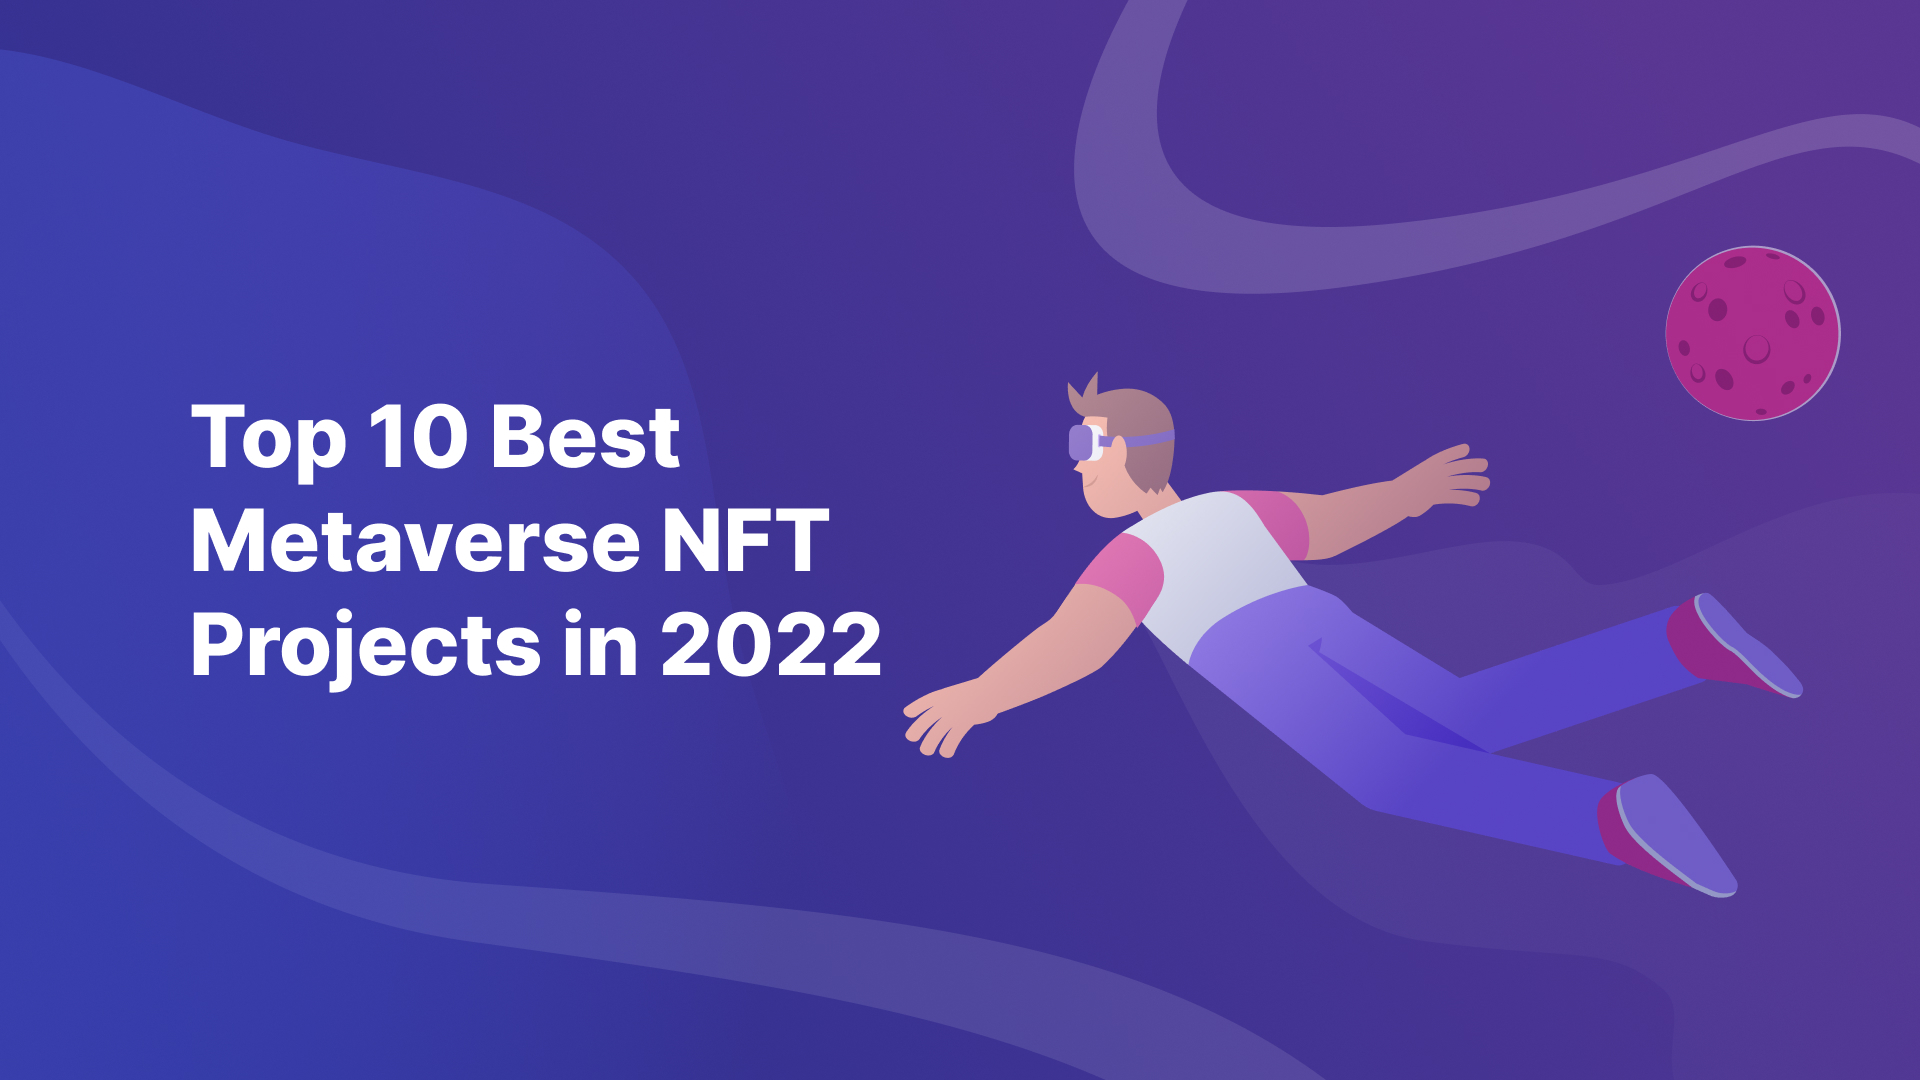 Top 10 Best Metaverse NFT Projects in 2022